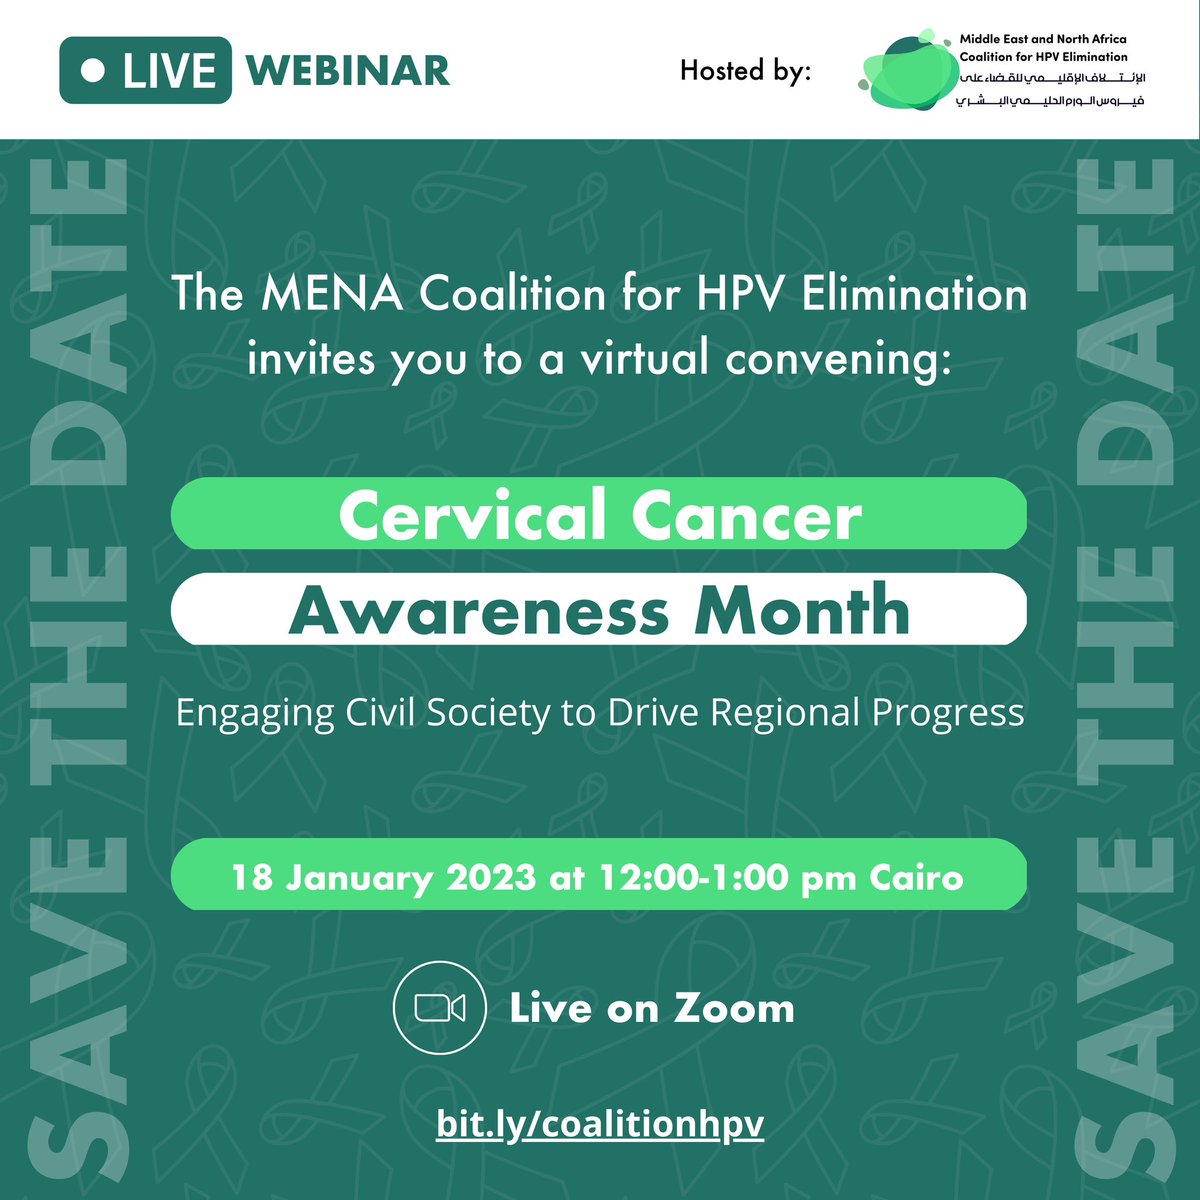 📢 Join tomorrow's webinar to celebrate #CervicalCancerAwarenessMonth and discuss #CivilSociety engagement around prevention and elimination efforts.
18 January 2023 at 12:00 GMT.
Register here 👉 bit.ly/coalitionhpv  #HPVinMENA @MenaHpv #endCervicalCancer @Drelkak